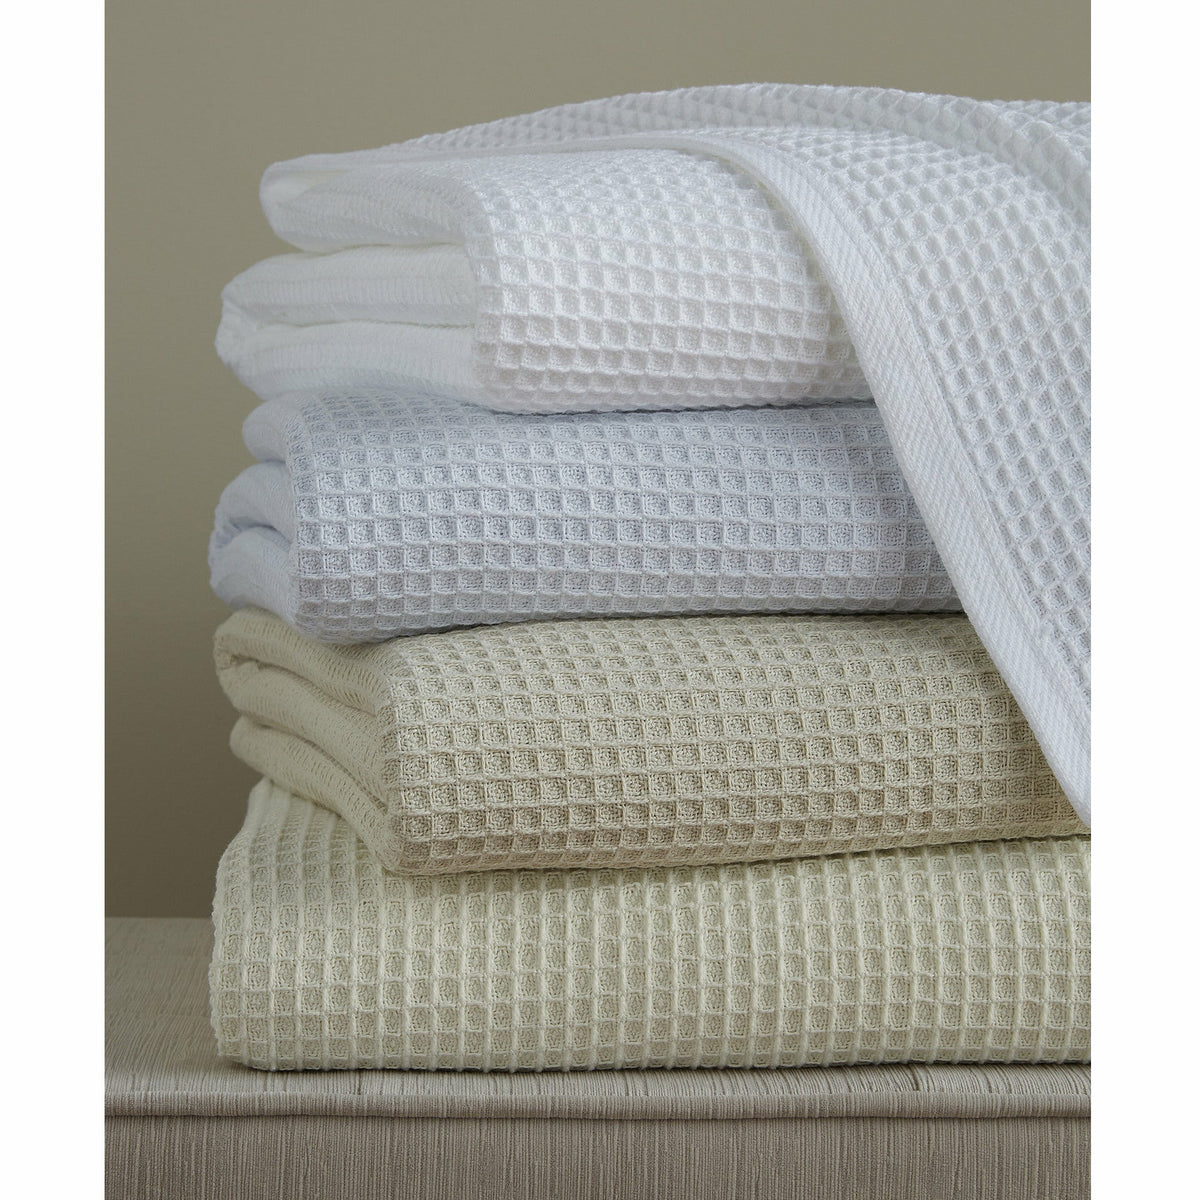 Sferra Kingston Blanket Stacked Colors Swaffle Weived Fine Linens